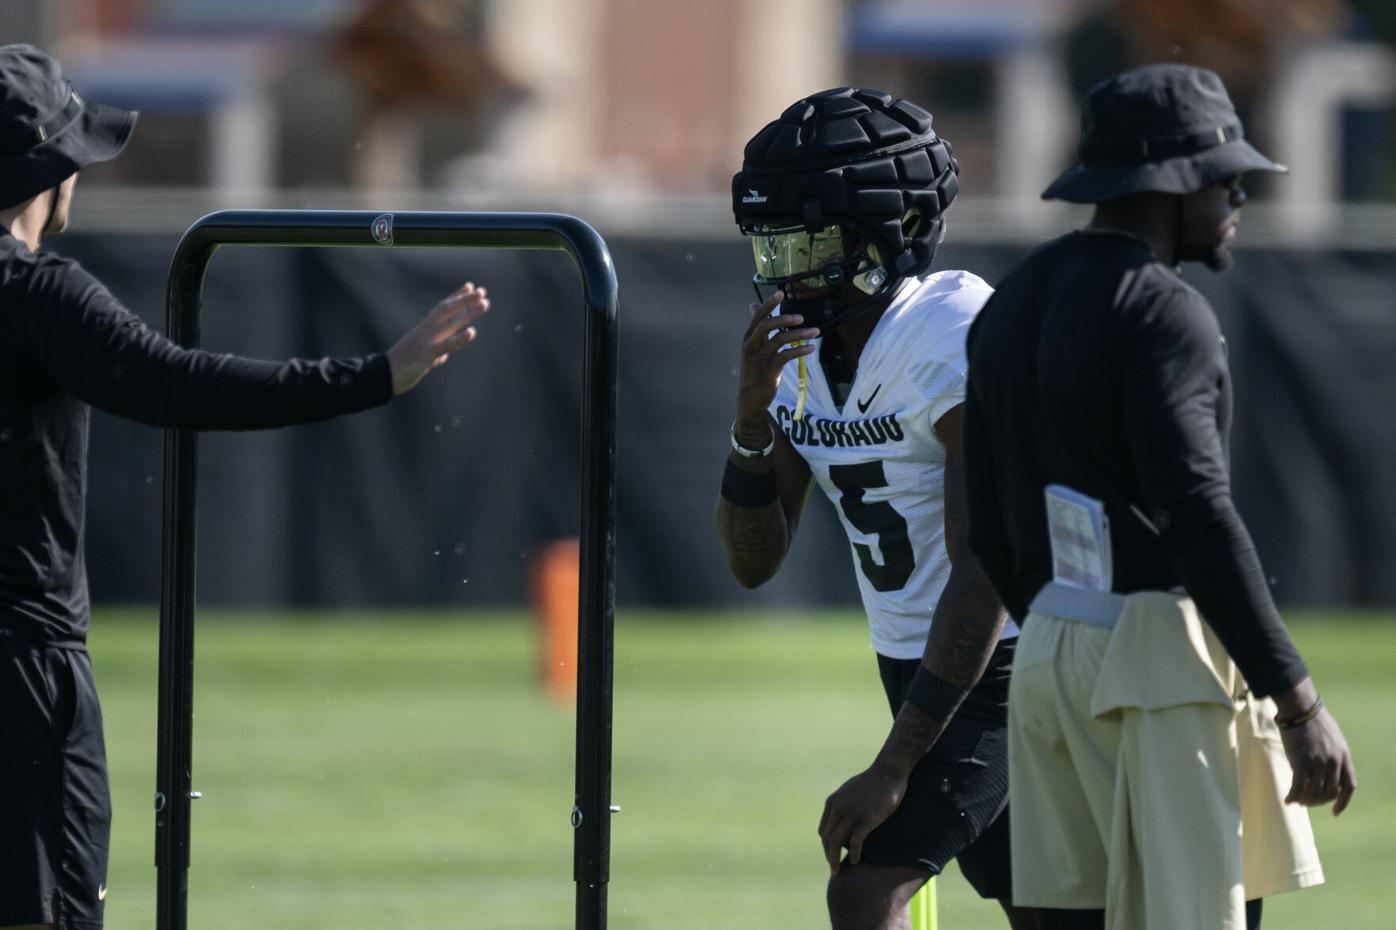 Colorado receiver shows off Wild Thing haircut before Buffaloes